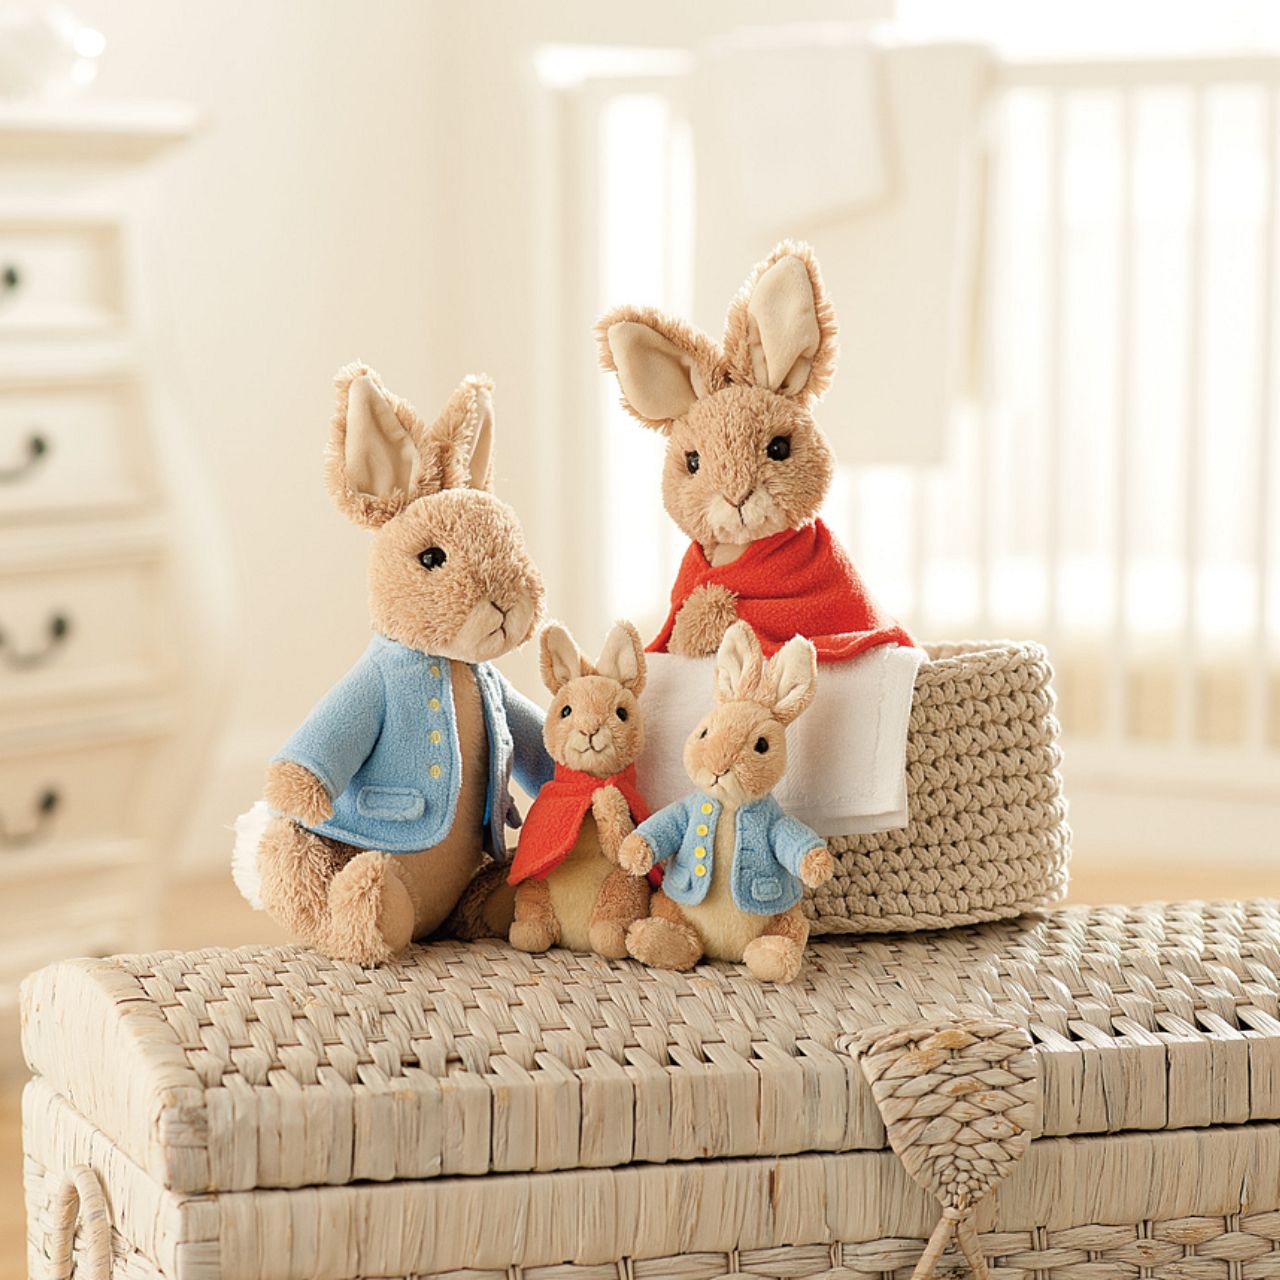 Over the years artists have captured the essence of Beatrix Potter’s lovable characters beautifully by bringing to life her original drawings, creating a delightful selection of figurines and giftware, which appeal to all fans of Beatrix Potter.